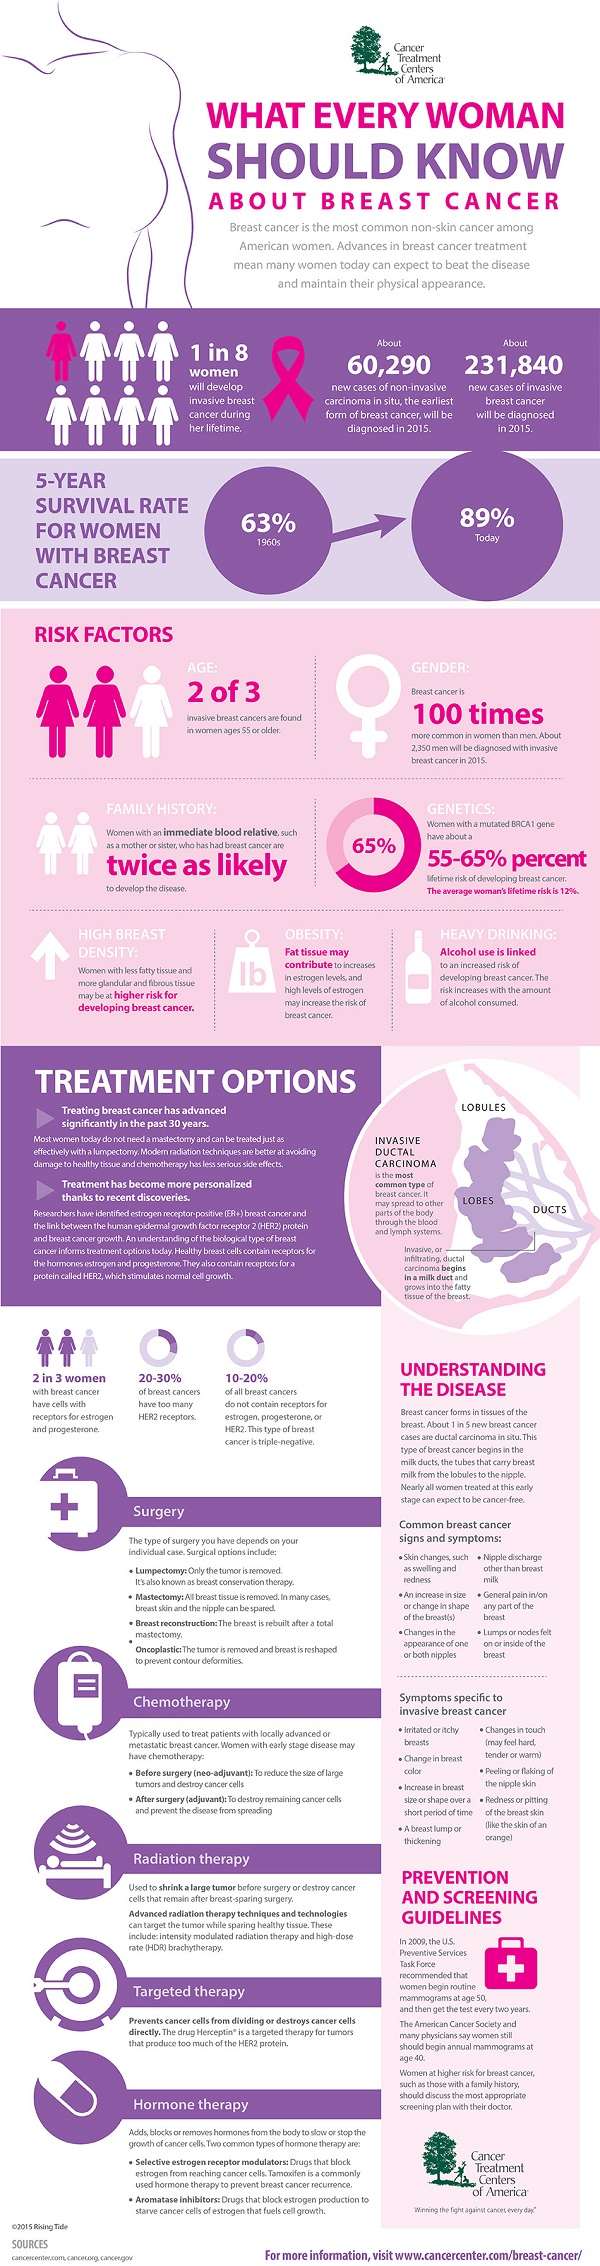 Breast-Cancer-infographic-11-19-14[1].jpg600